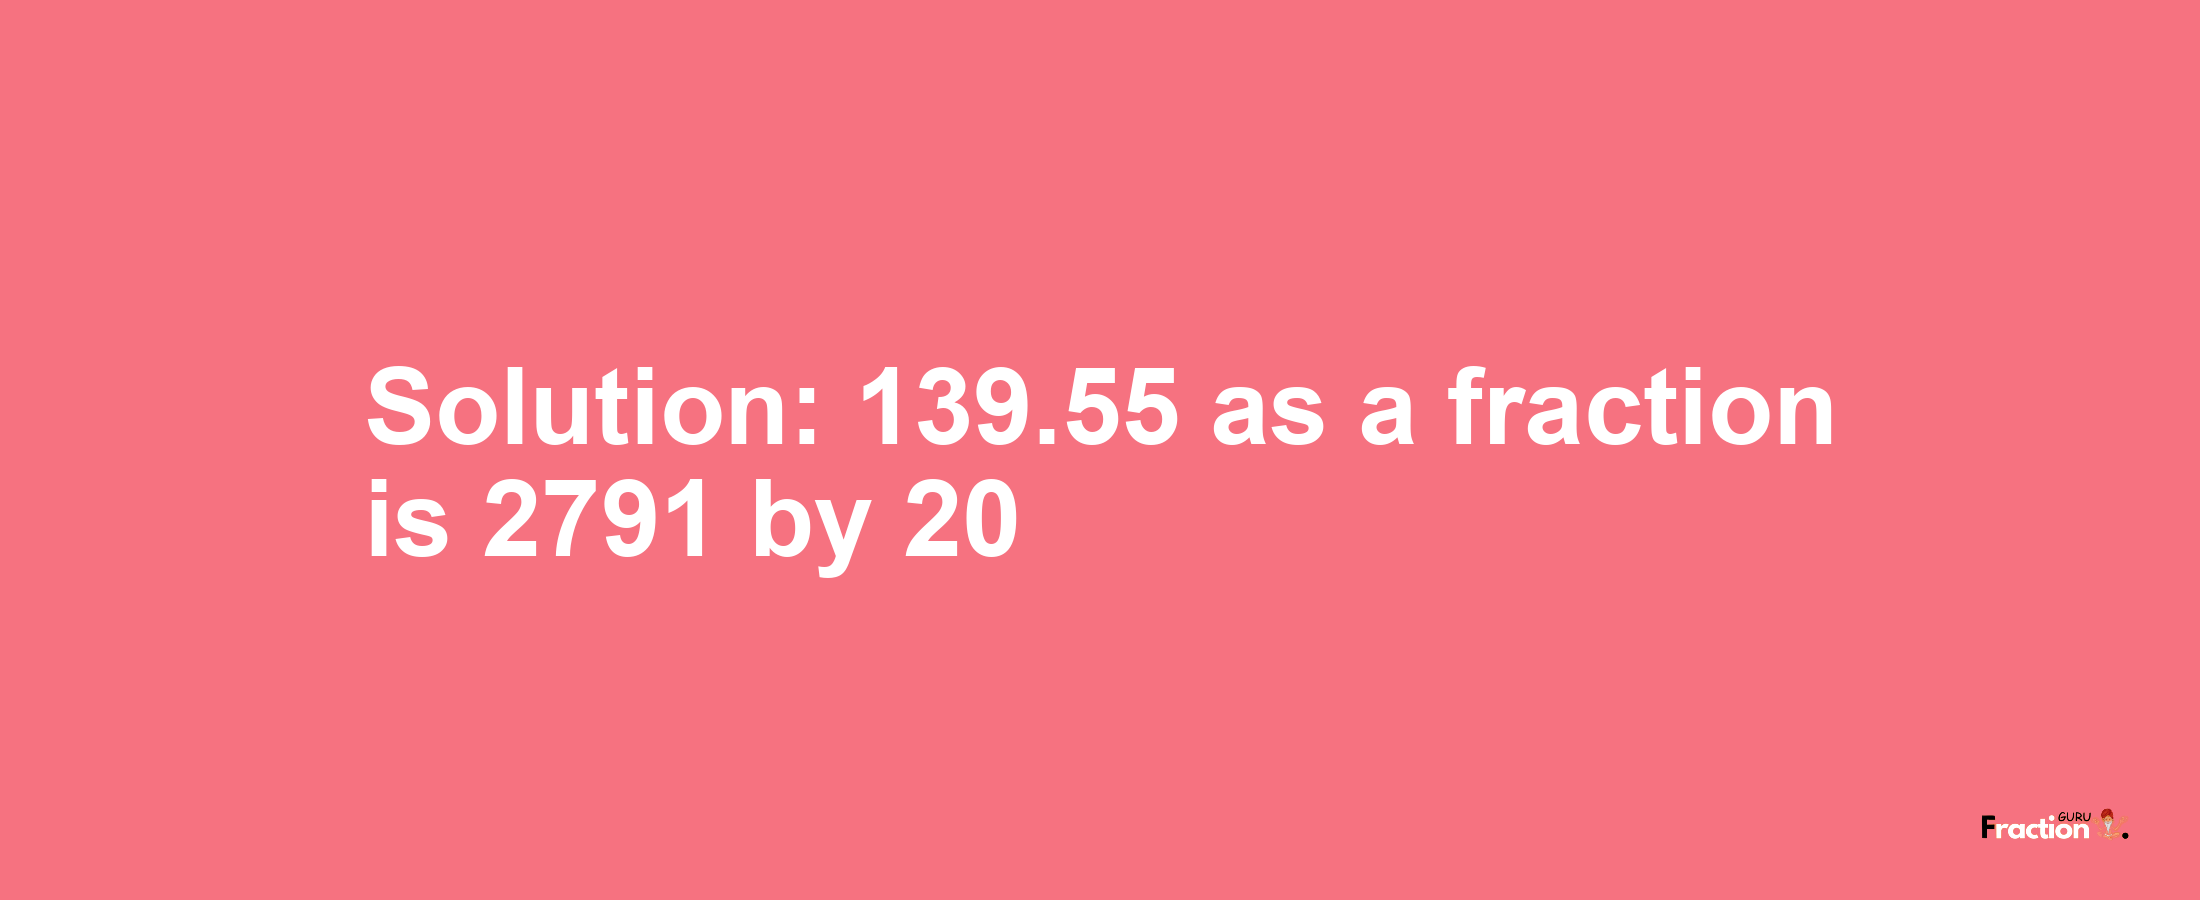 Solution:139.55 as a fraction is 2791/20